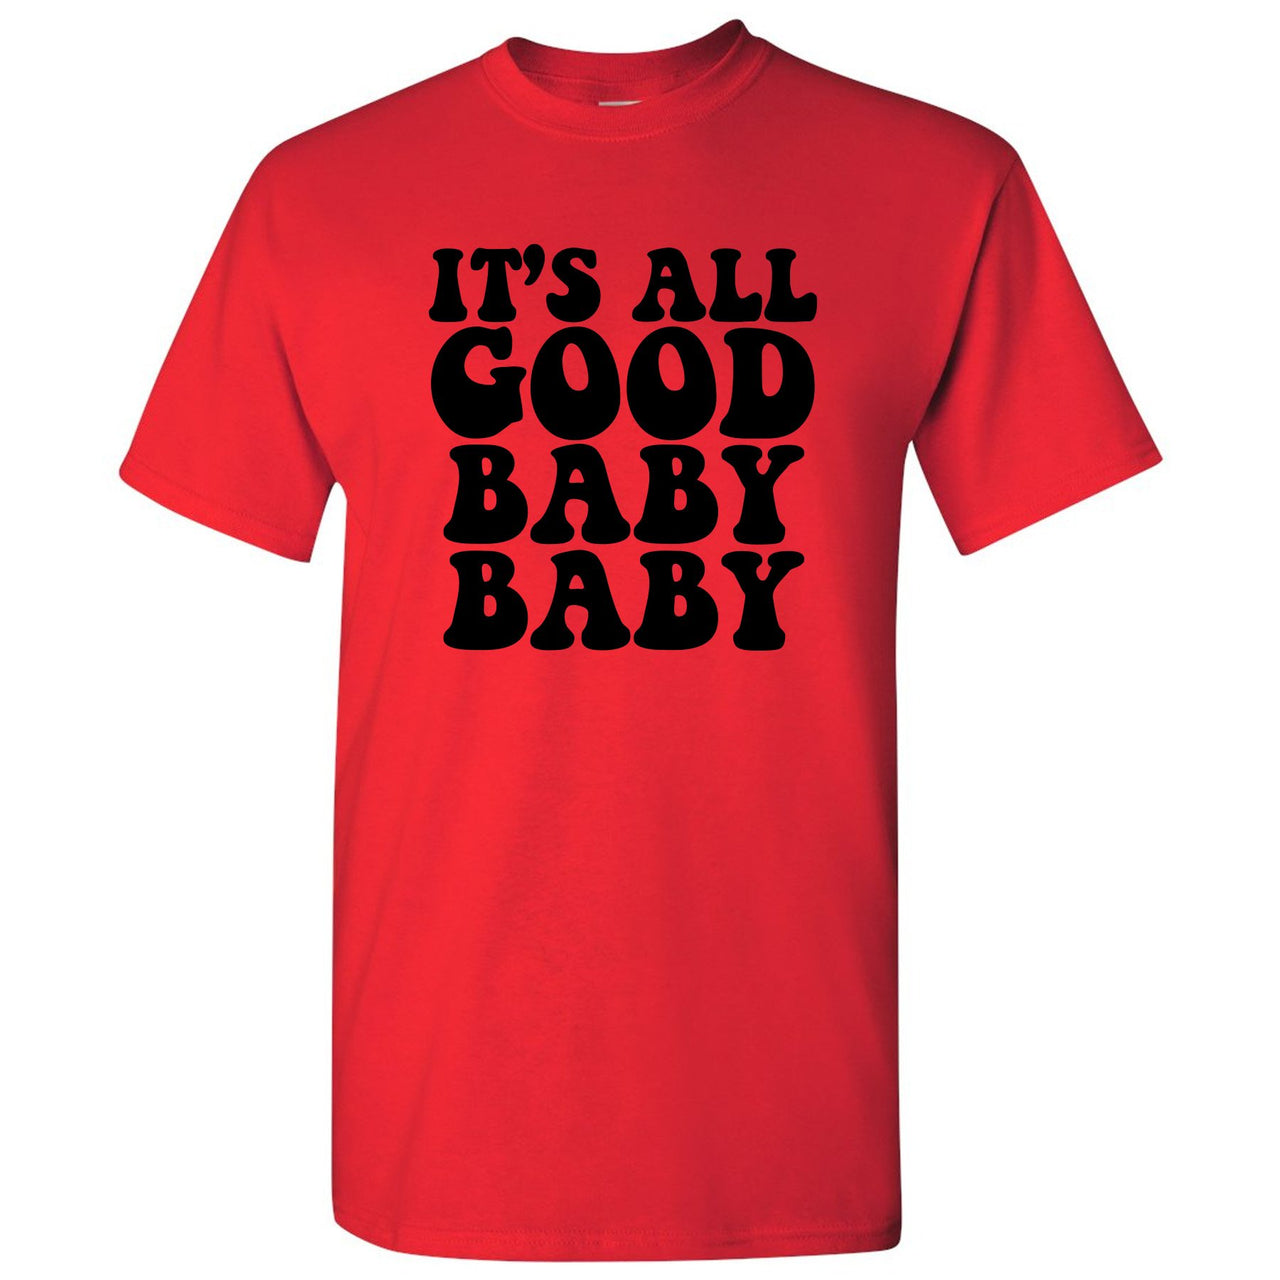 Bred 2019 4s T Shirt | It's All Good Baby Baby, Red